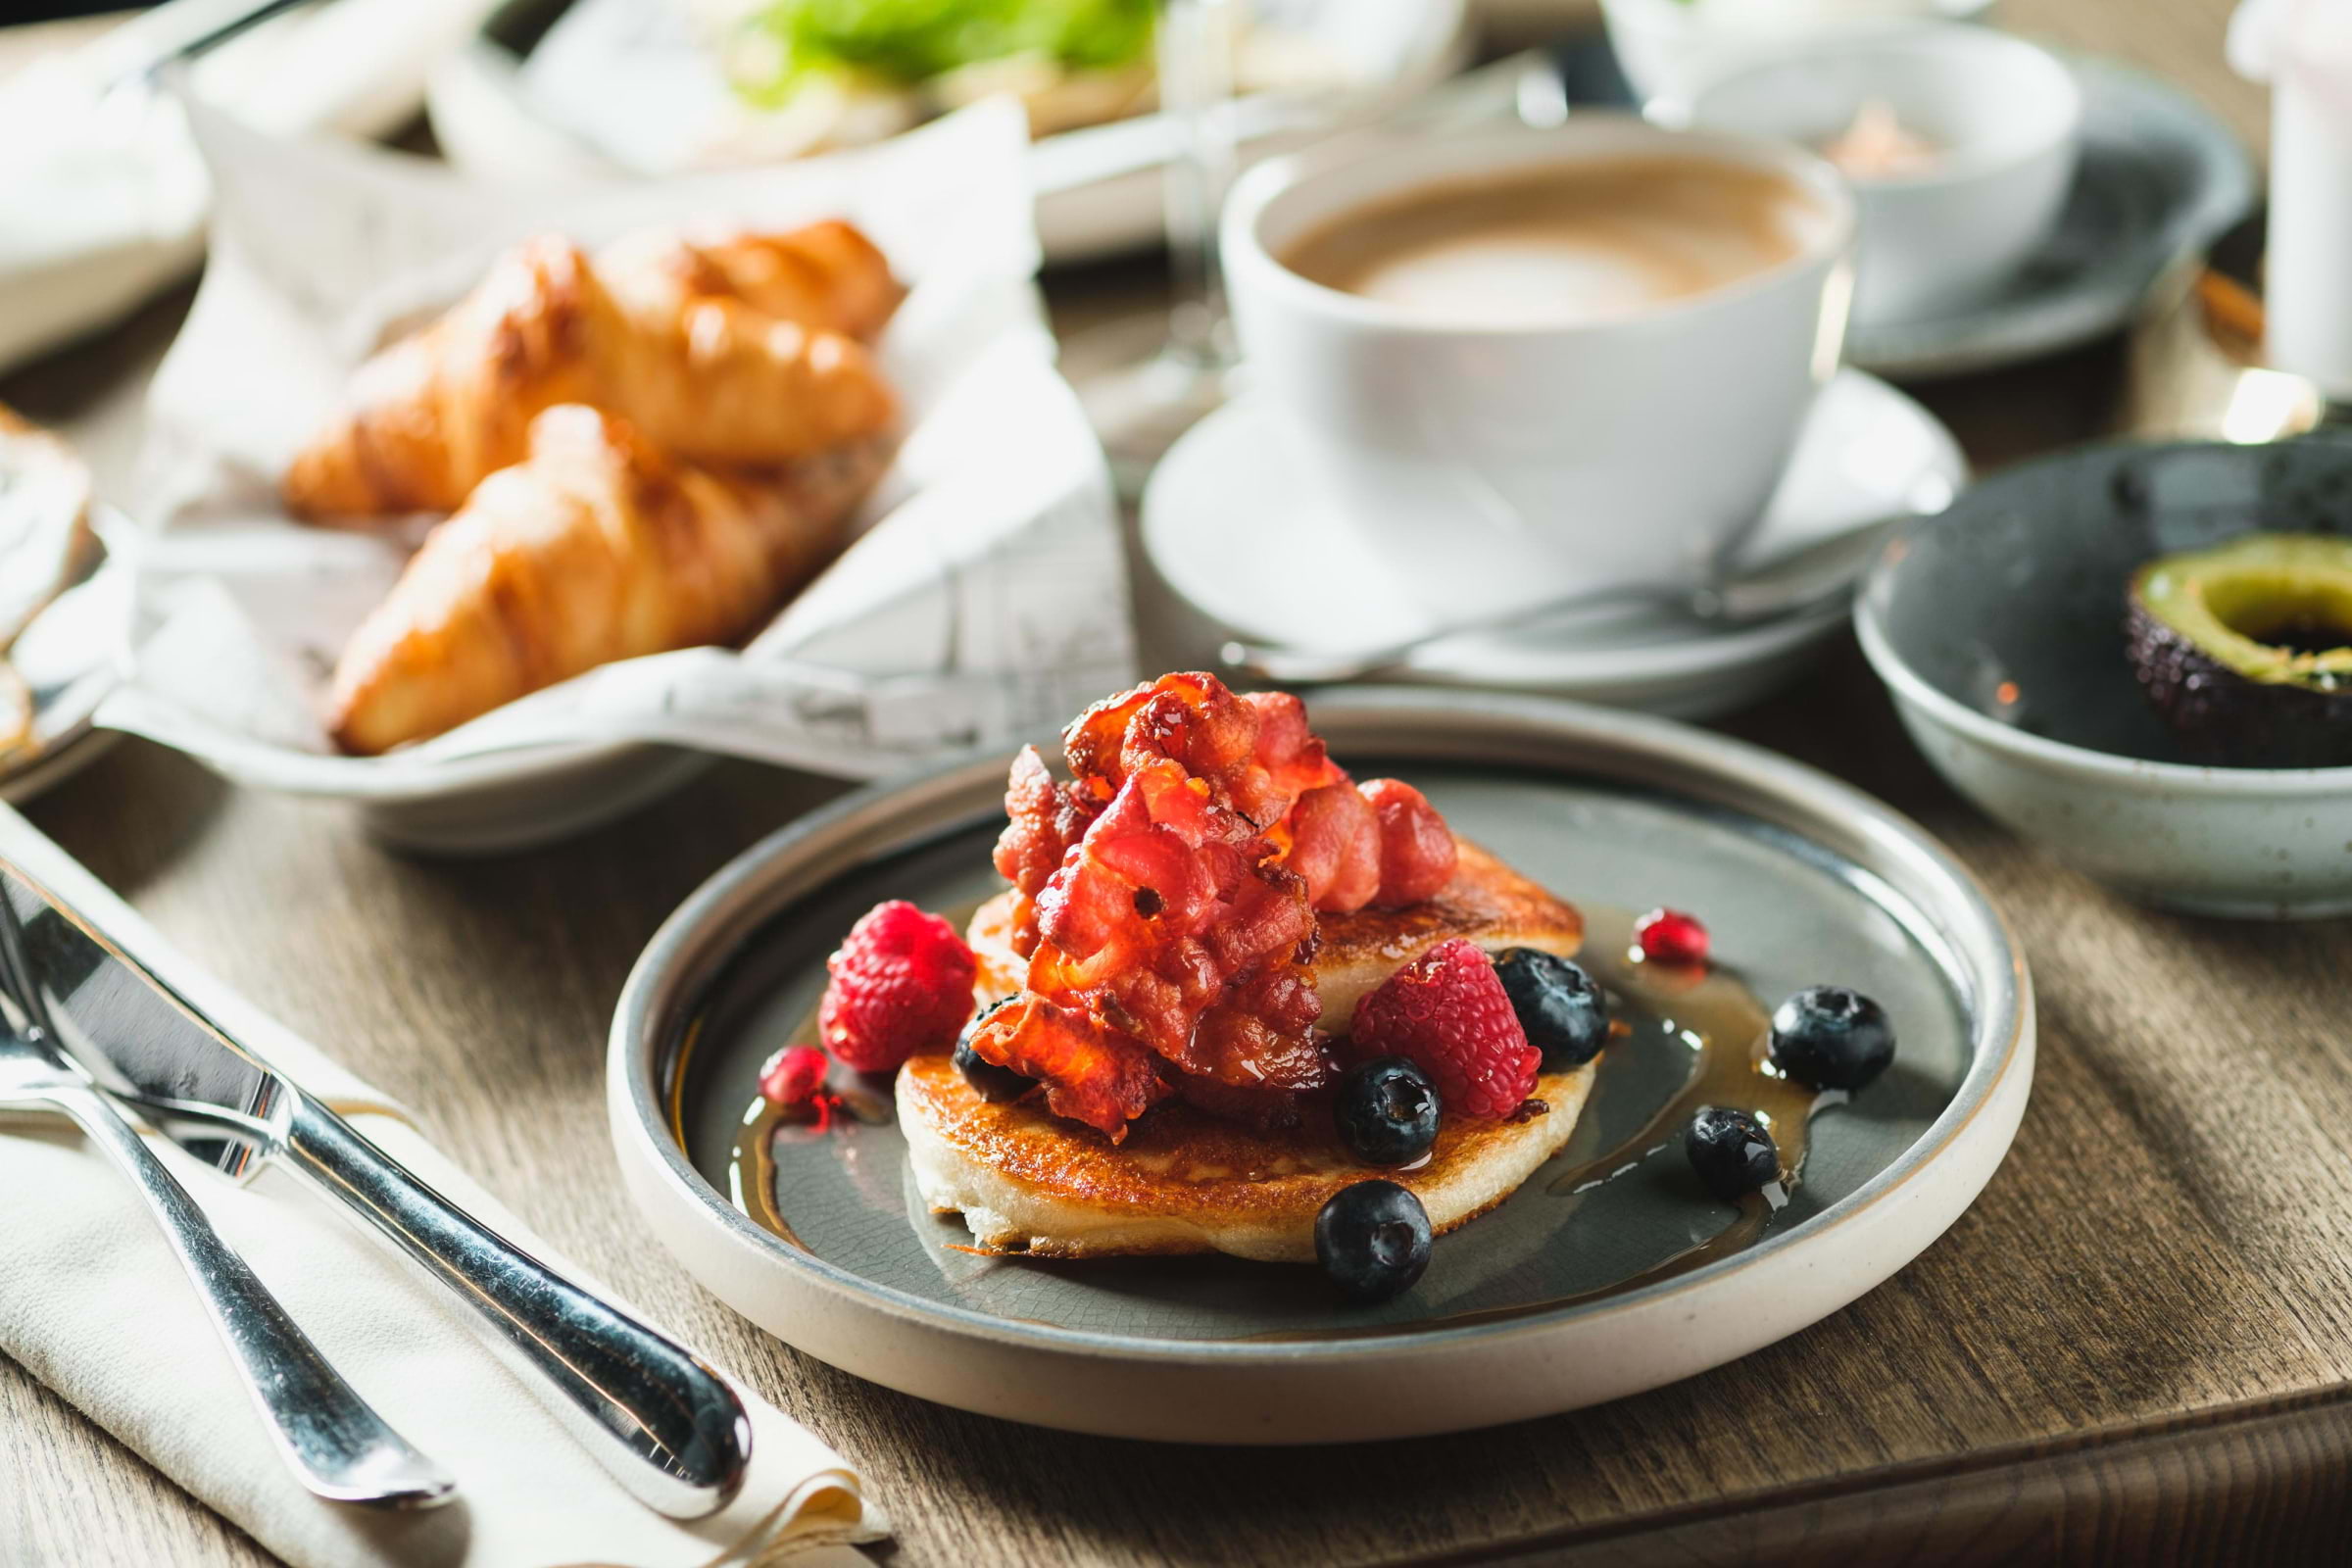 Guide to brunch in Mayfair